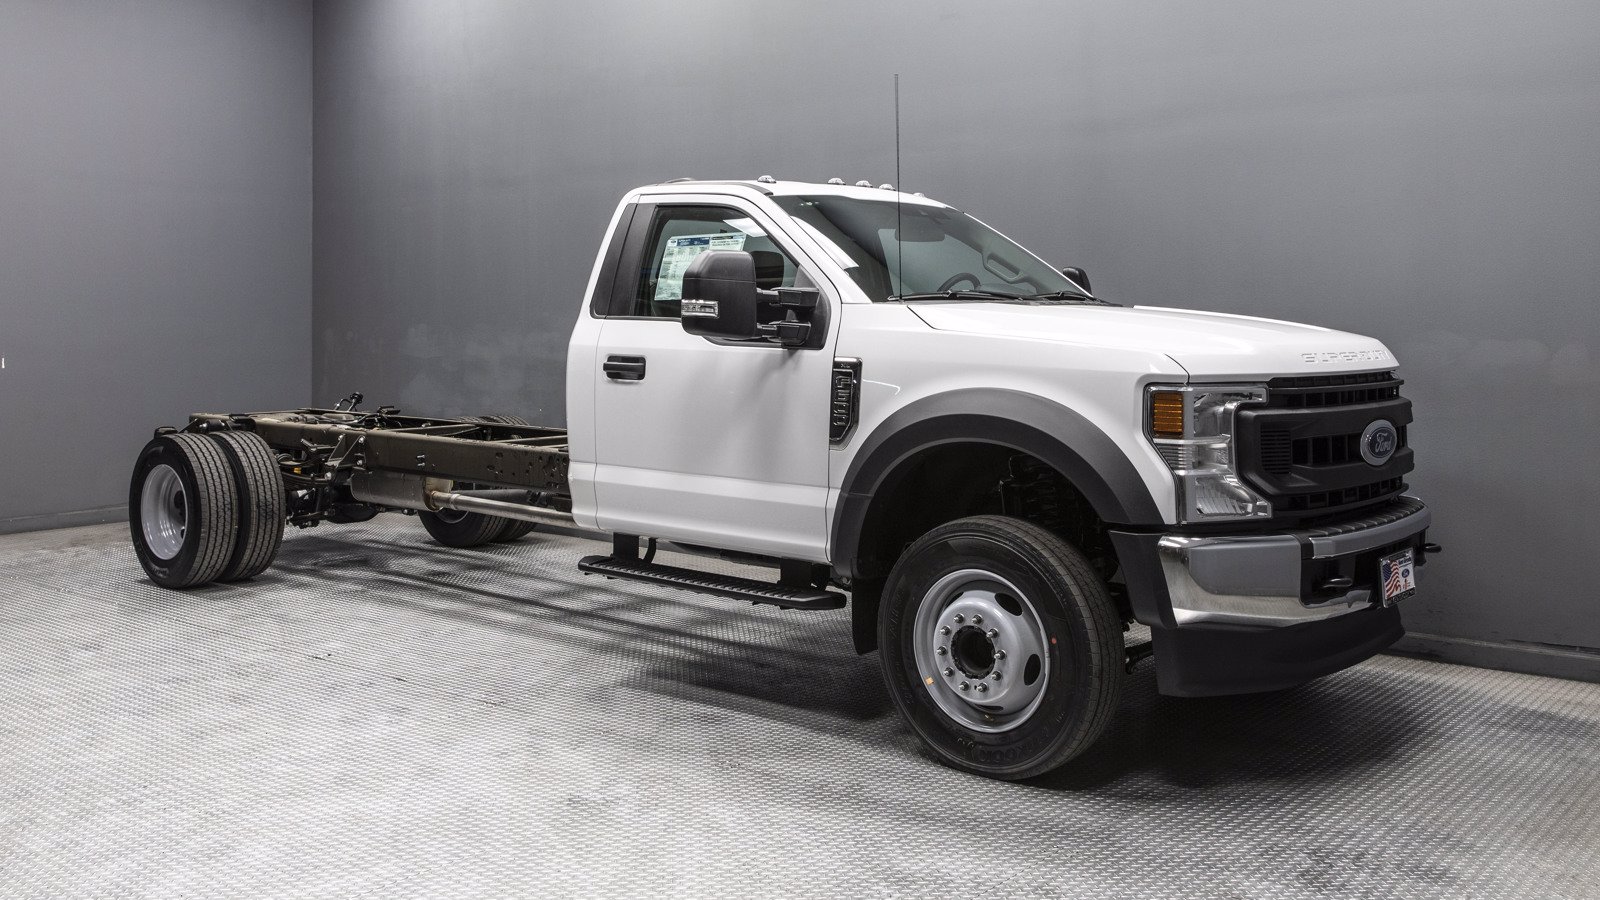 New 2020 Ford Super Duty F600 DRW XL Regular Cab ChassisCab in Buena